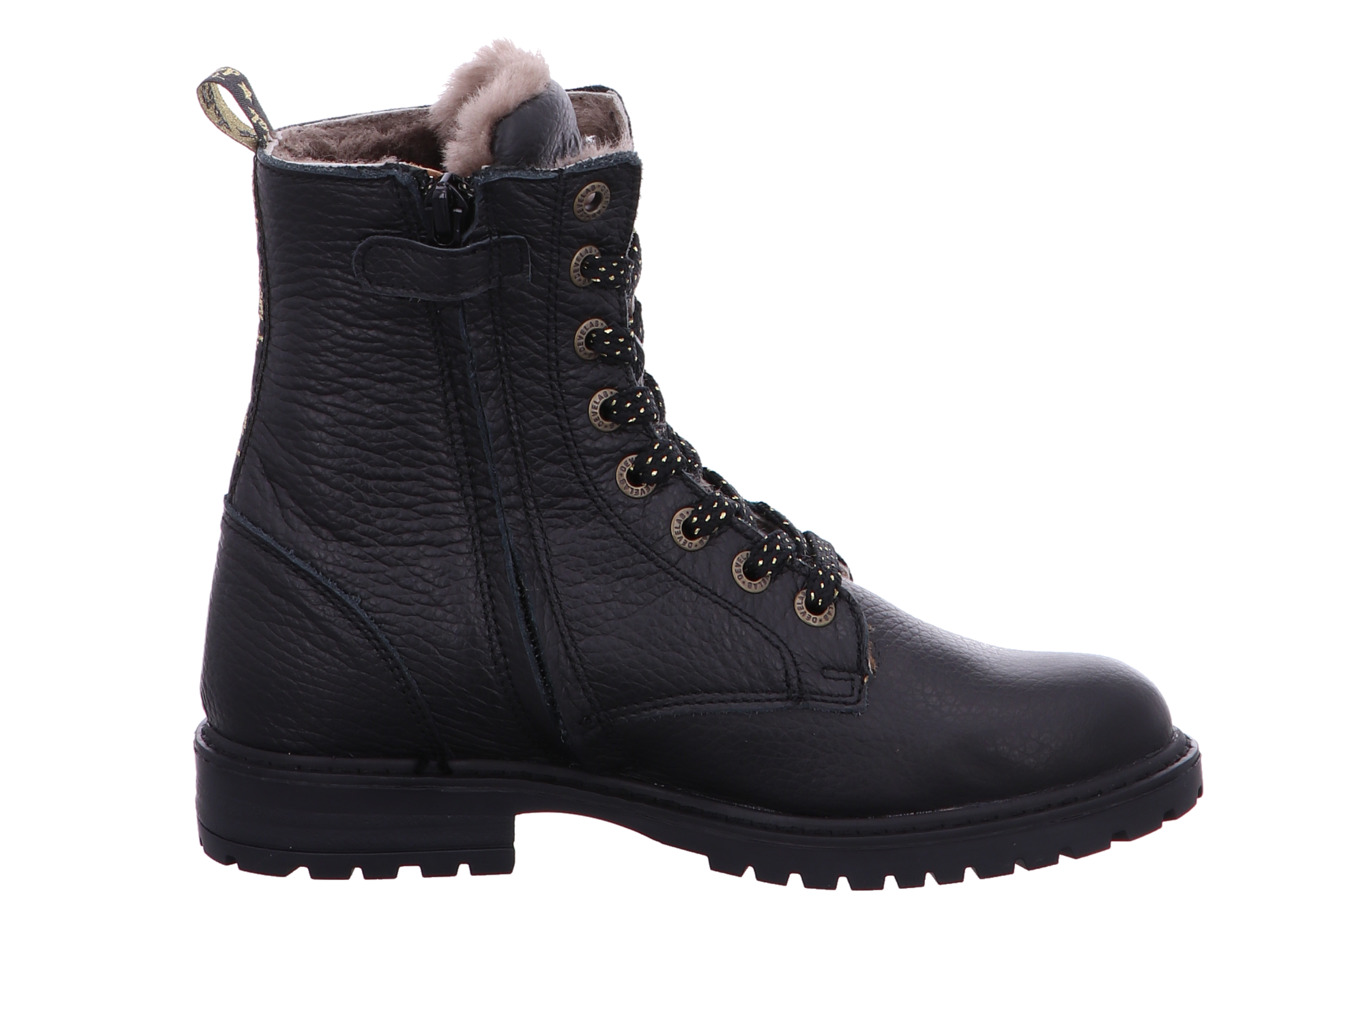 develab_girls_mid_boot_laces_42846_922_4155